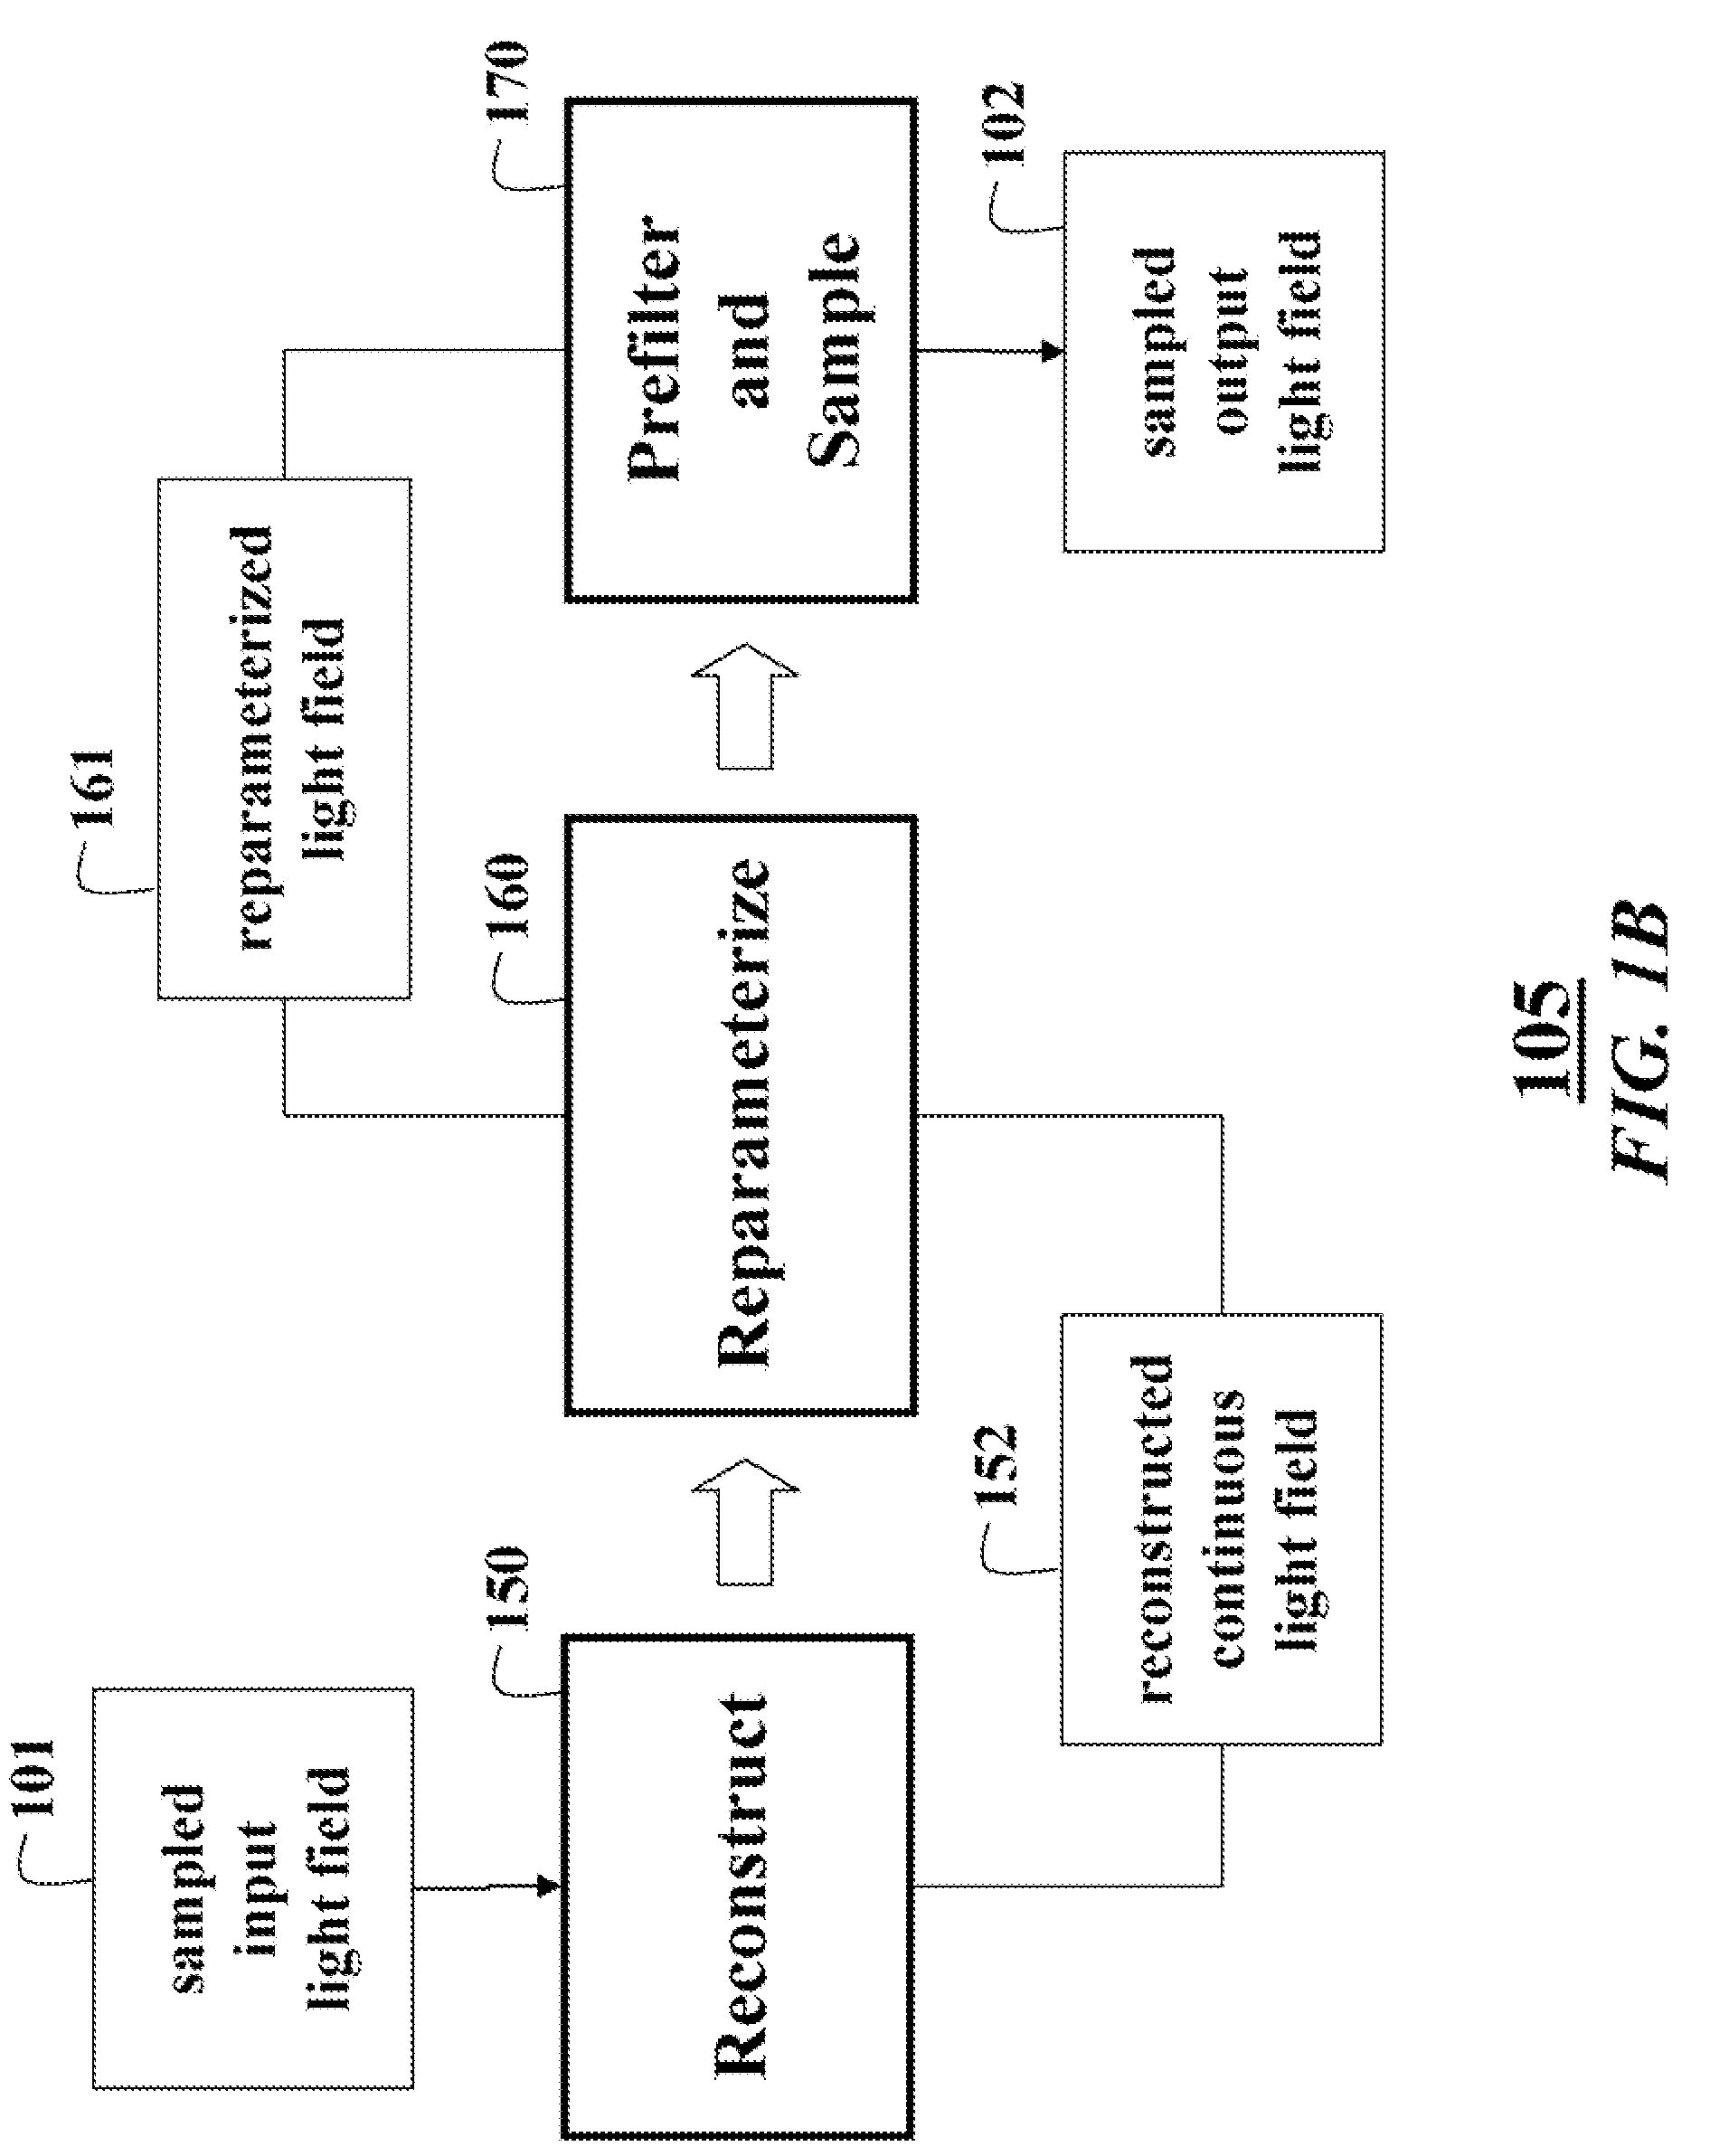 Method and System for Decoding and Displaying 3D Light Fields